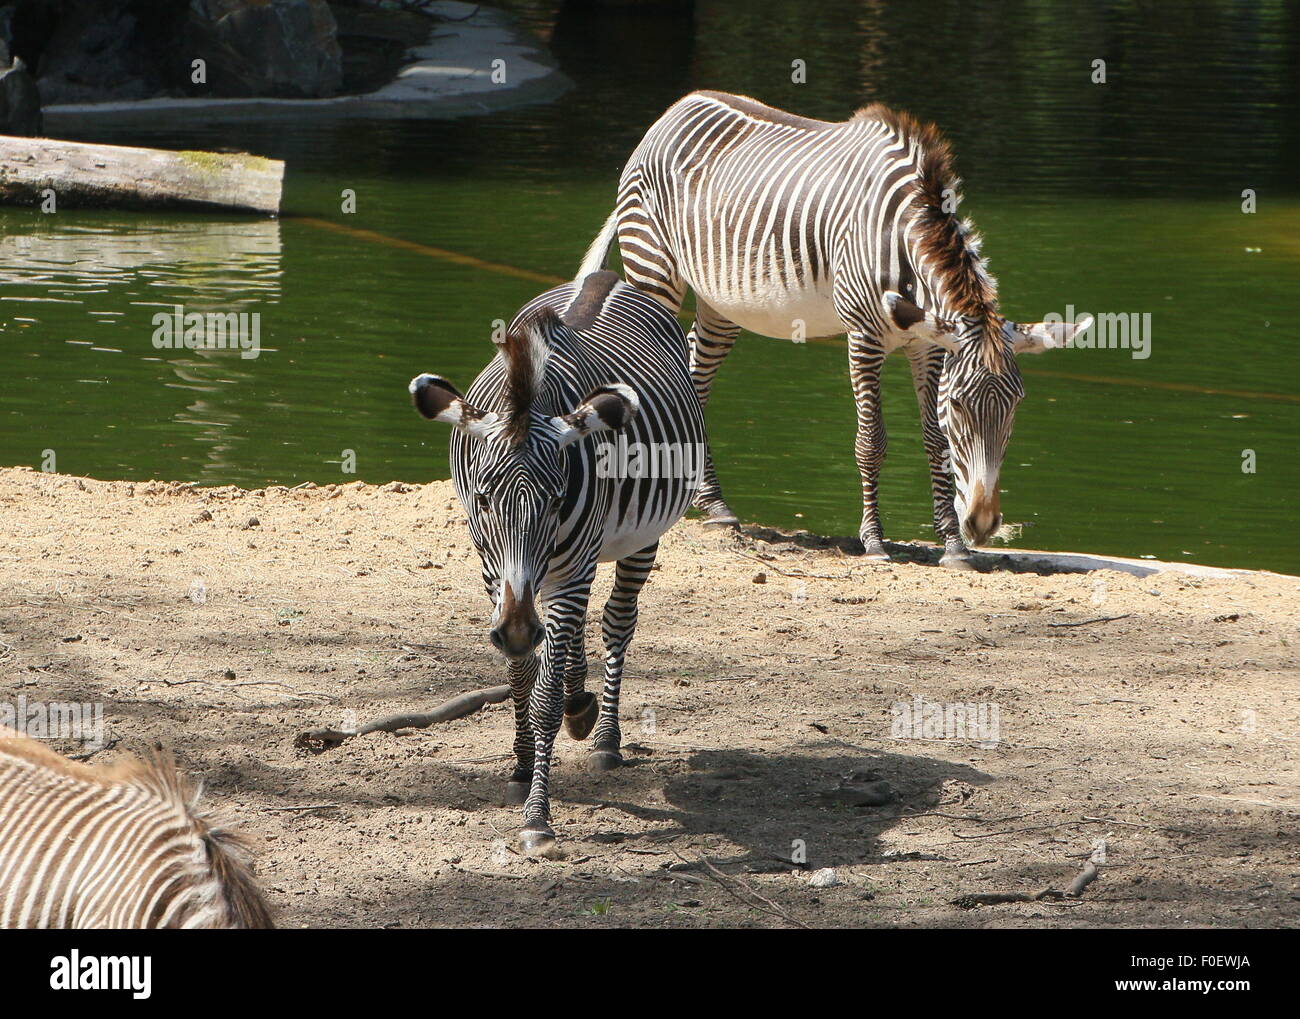 East African Grévy's zebra or Imperial zebras (Equus grevyi) at Dierenpark Amersfoort Zoo, The Netherlands Stock Photo